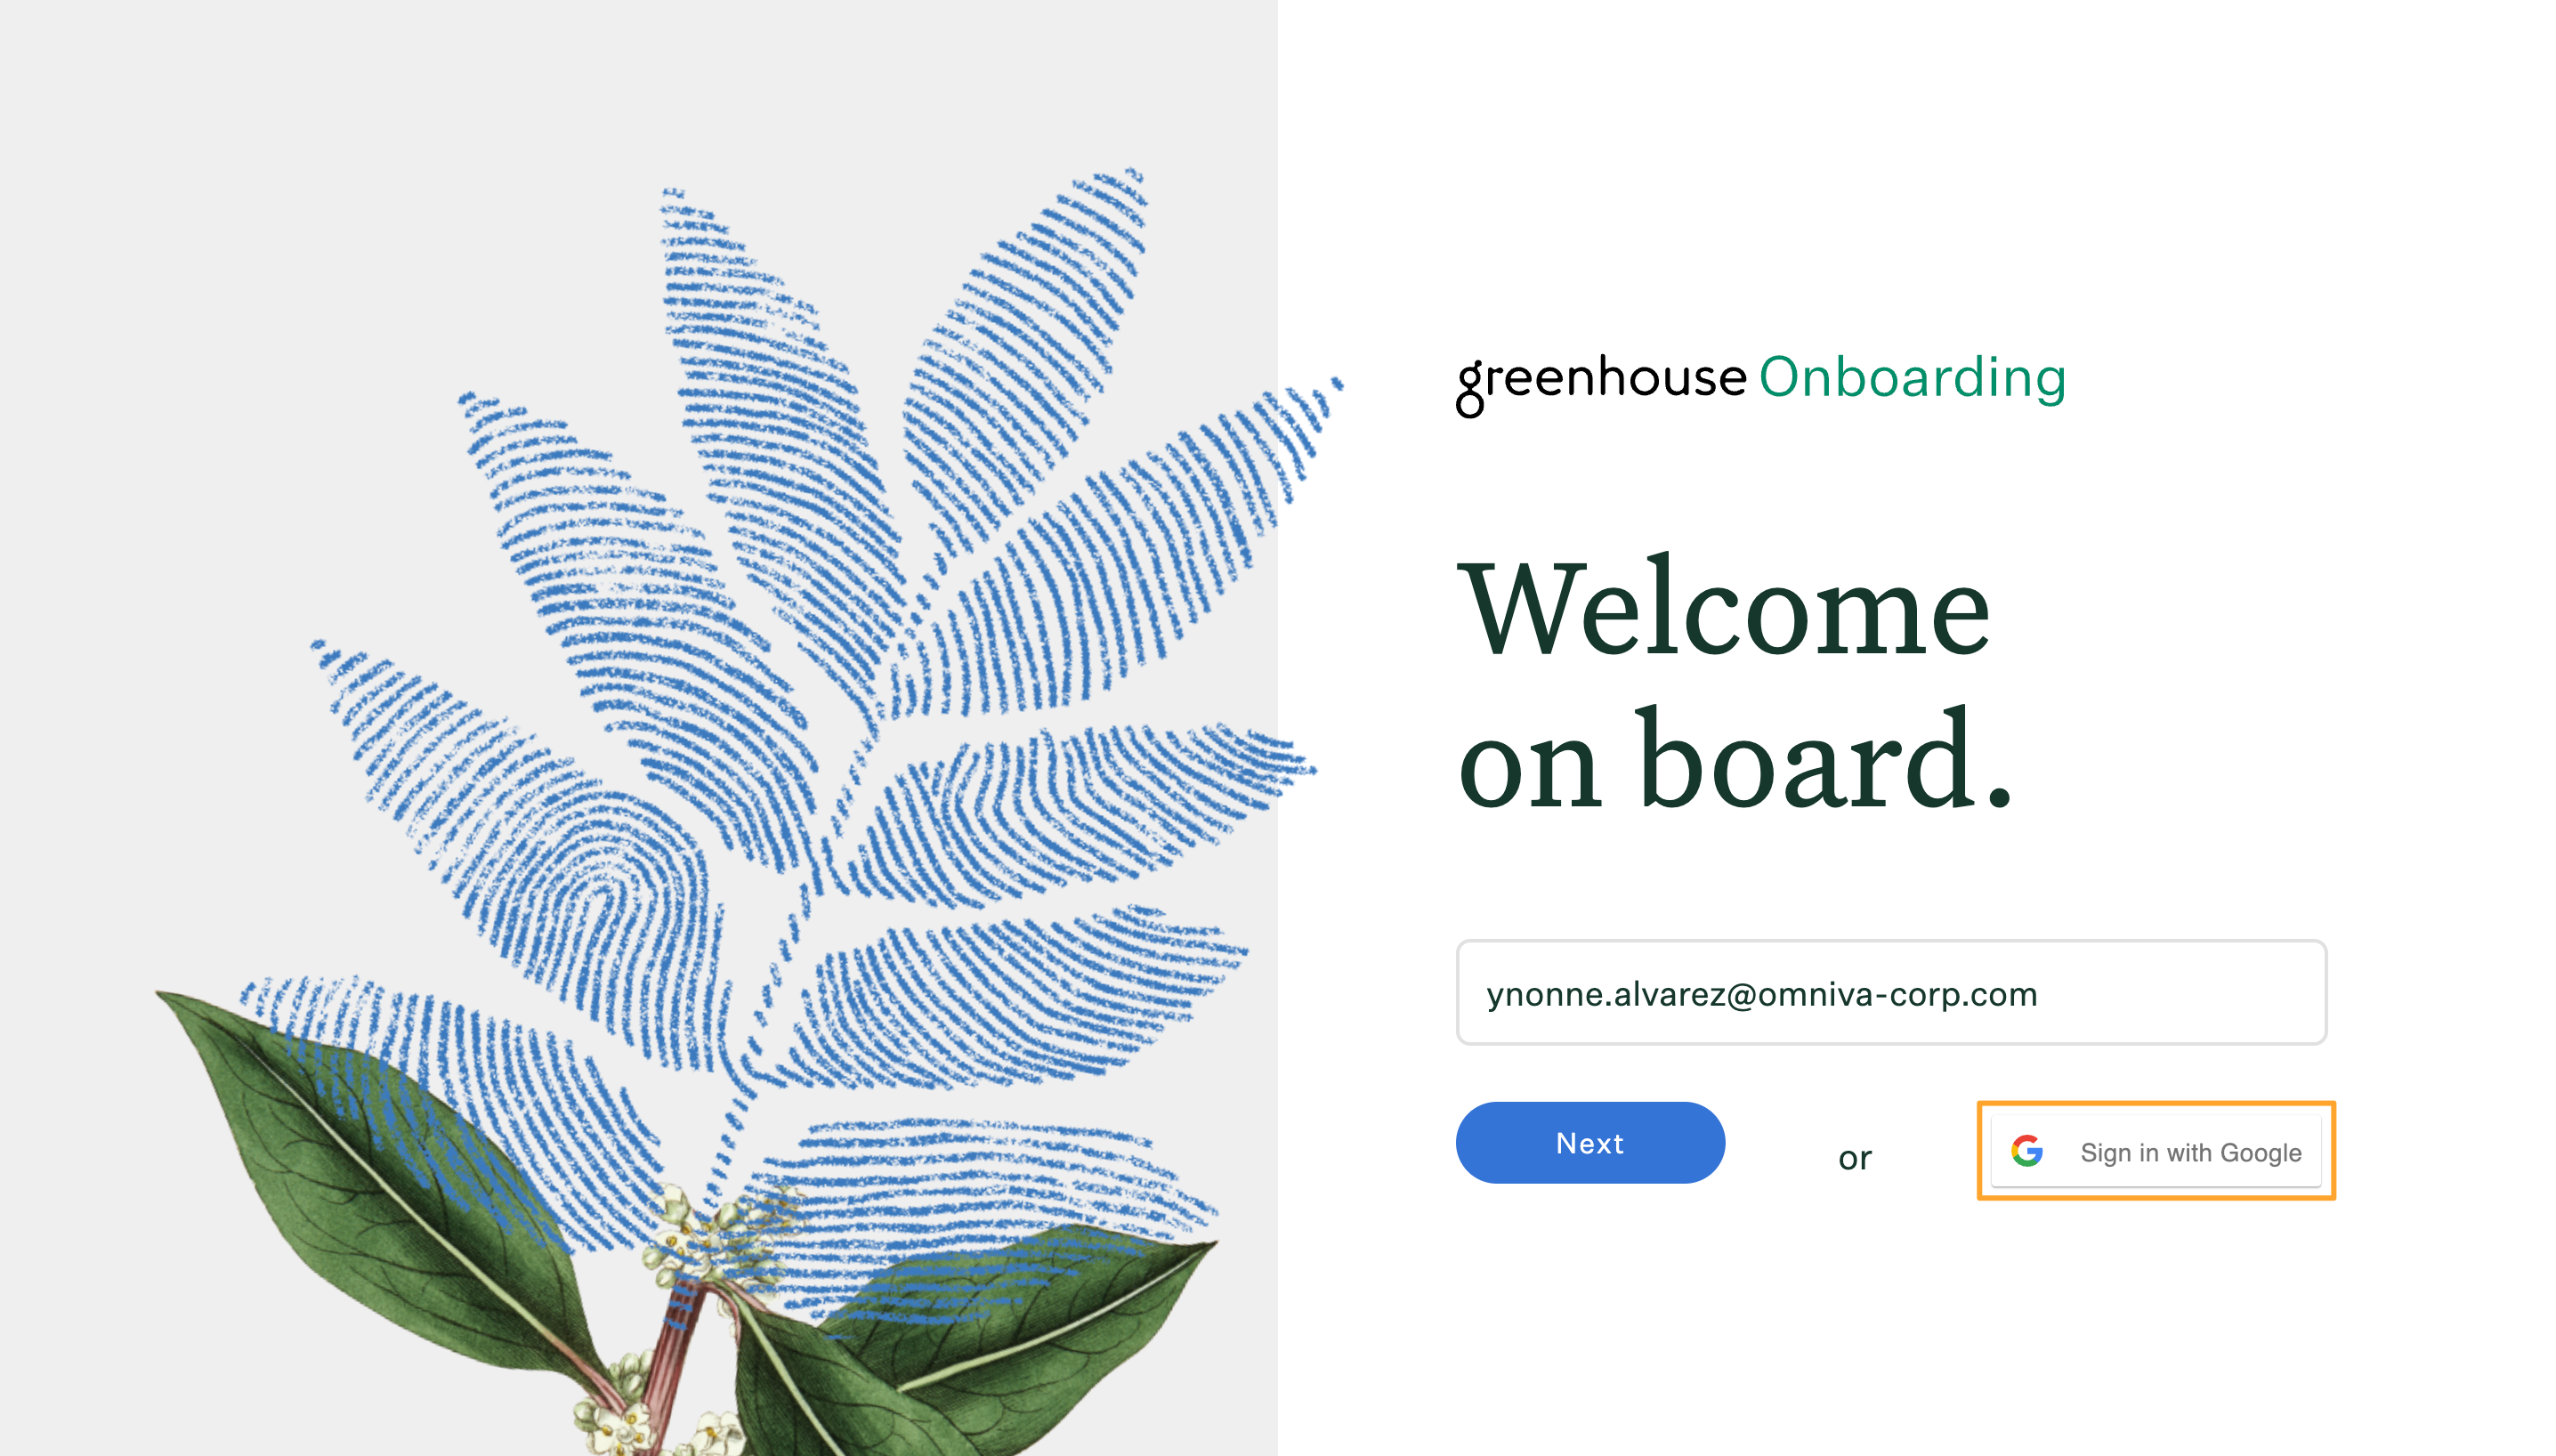 Greenhouse Onboarding login page with Sign in with Google button highlighted